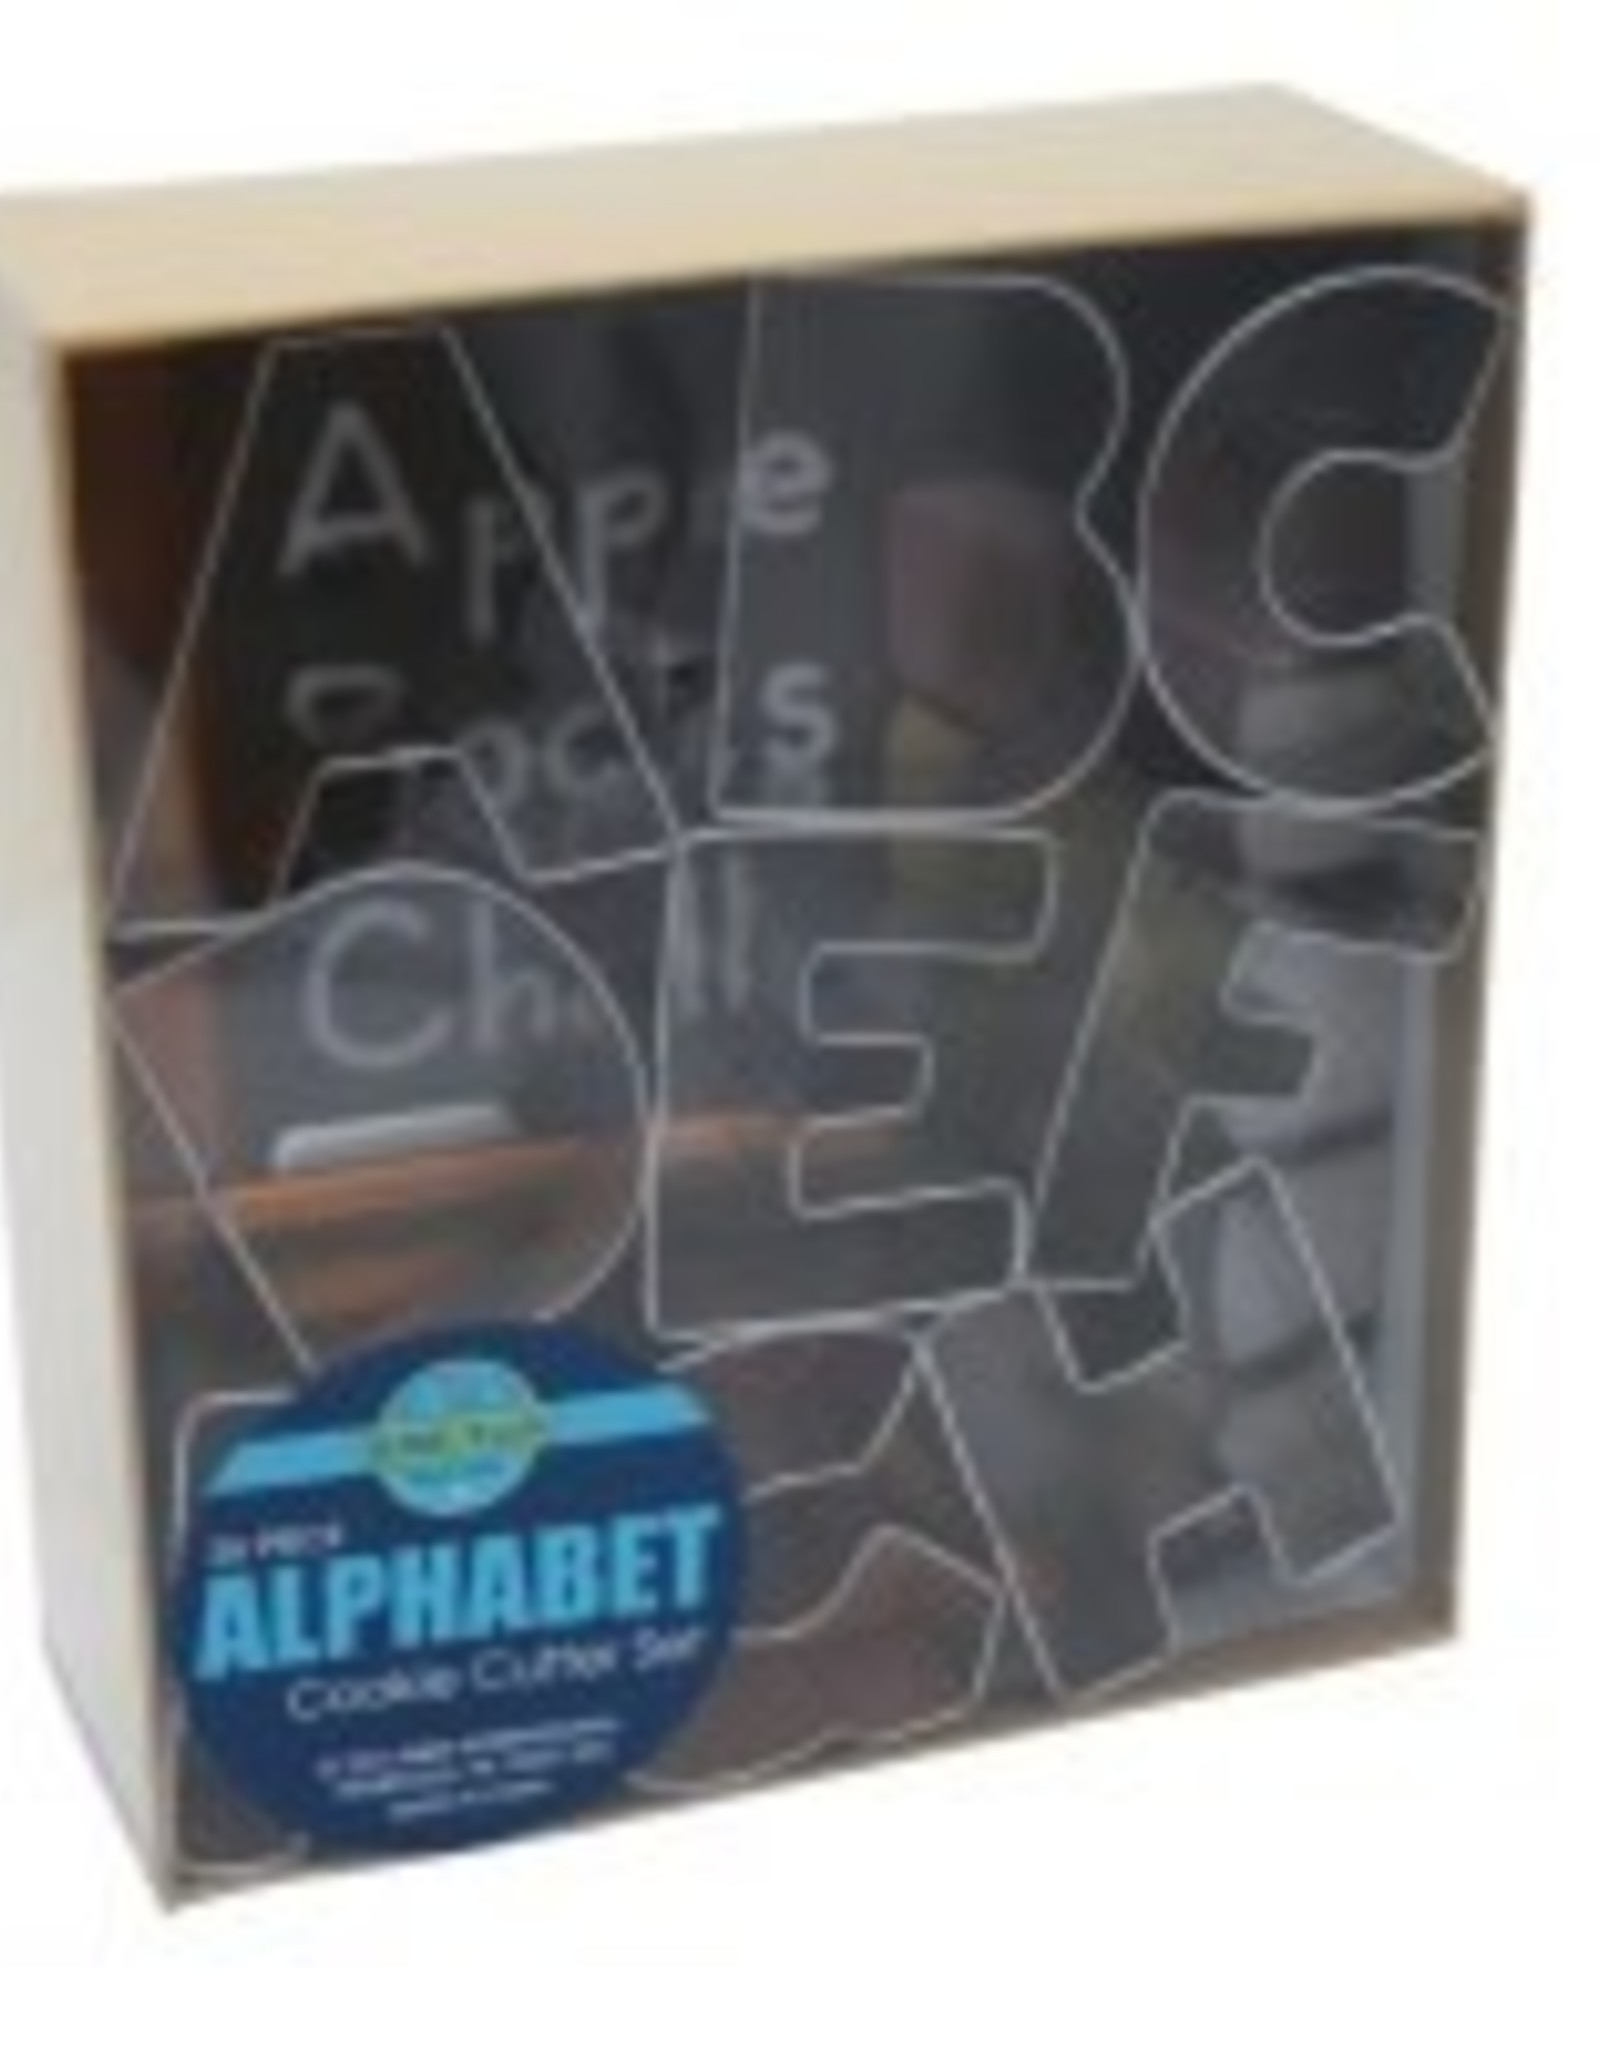 R and M Alphabet Cookie Cutter Set (26 pc.)